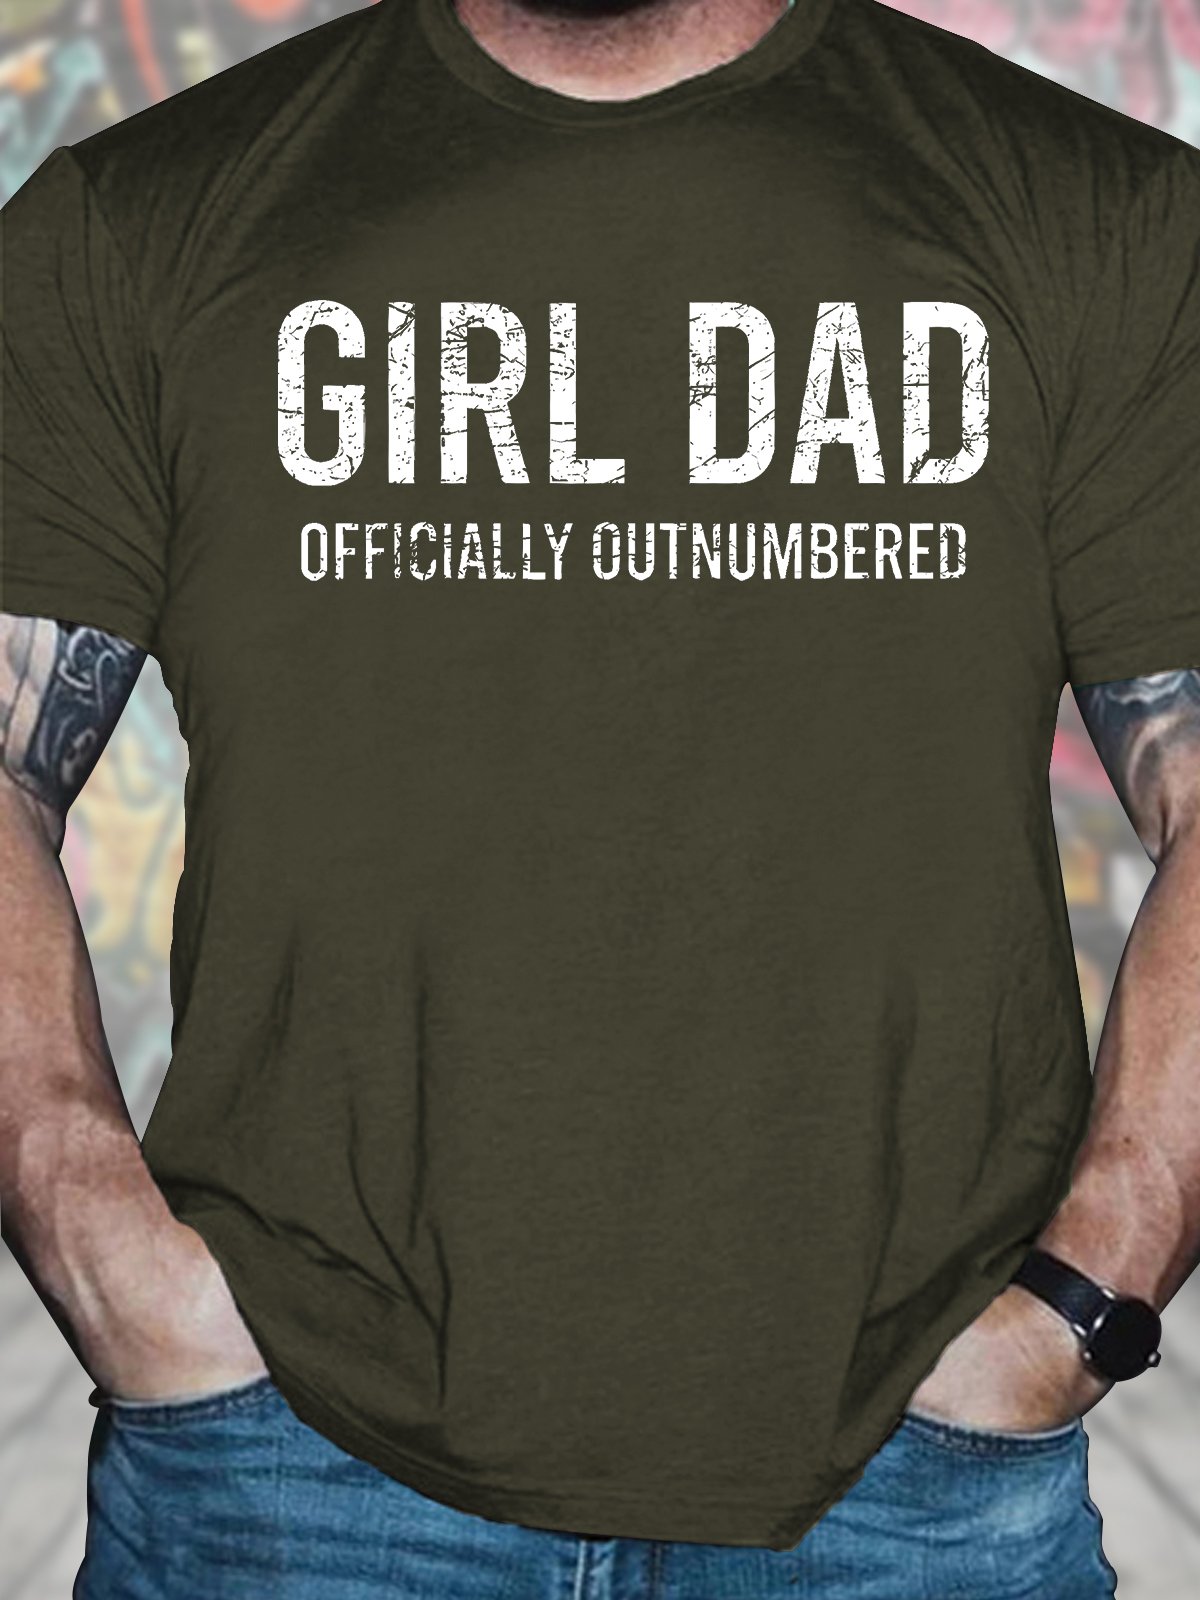 Men's Funny Girl Dad Officially Outnumbered Graphic Printing Text Letters Crew Neck Loose Casual T-Shirt